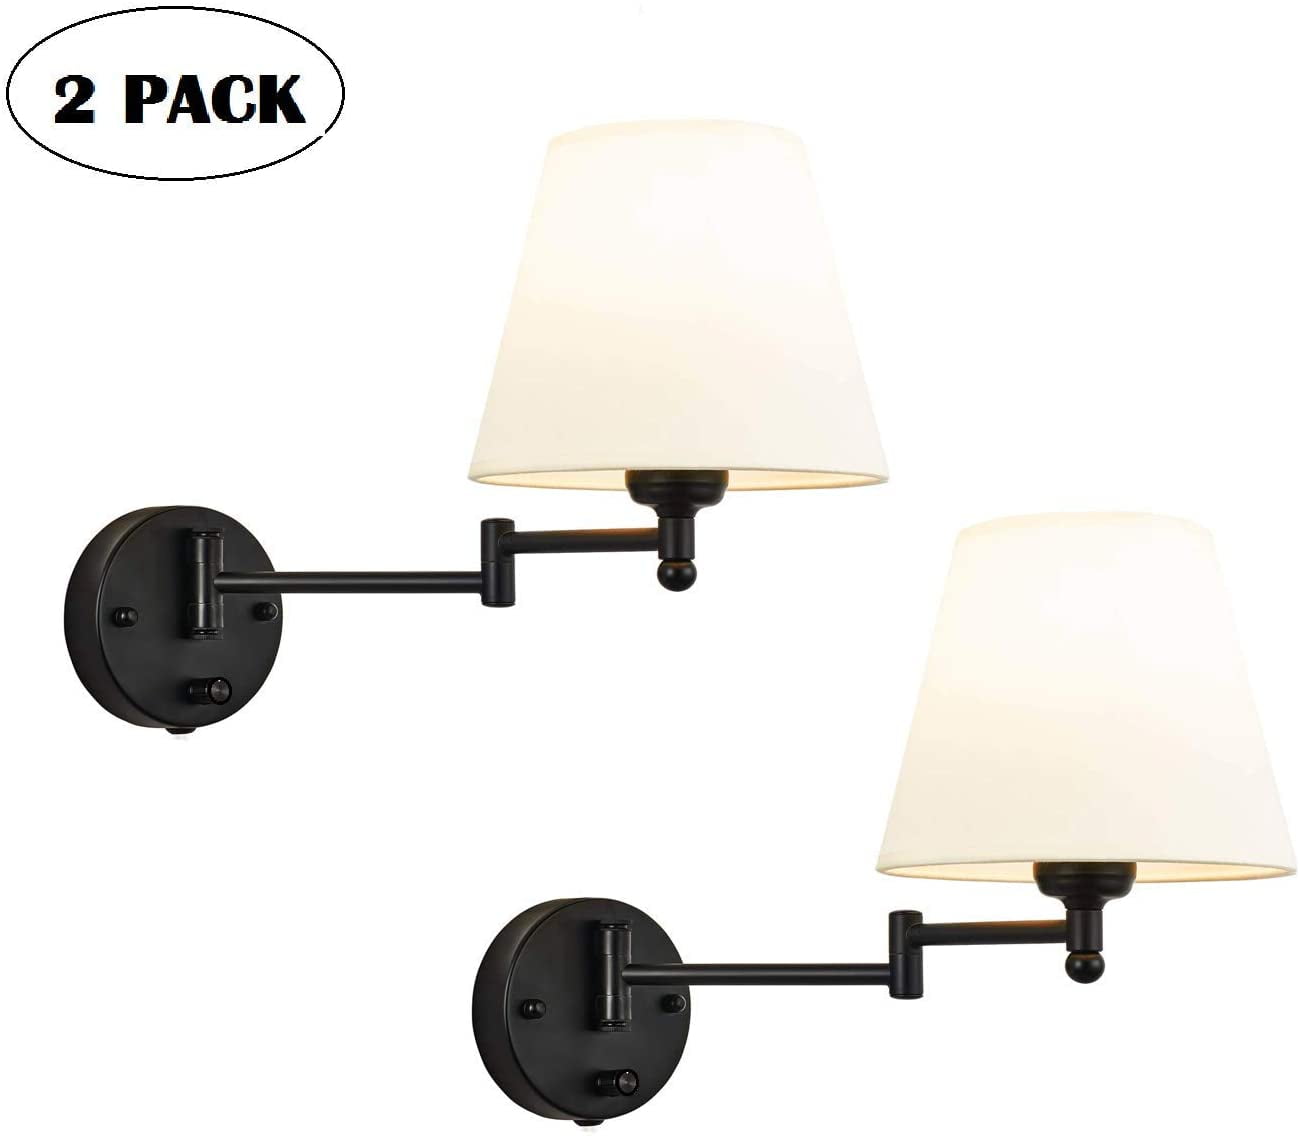 Adjustable Swing Arm Sconces 2 Pack Wall Lamps with White Shade & Black Metal (Bulbs Not Included)